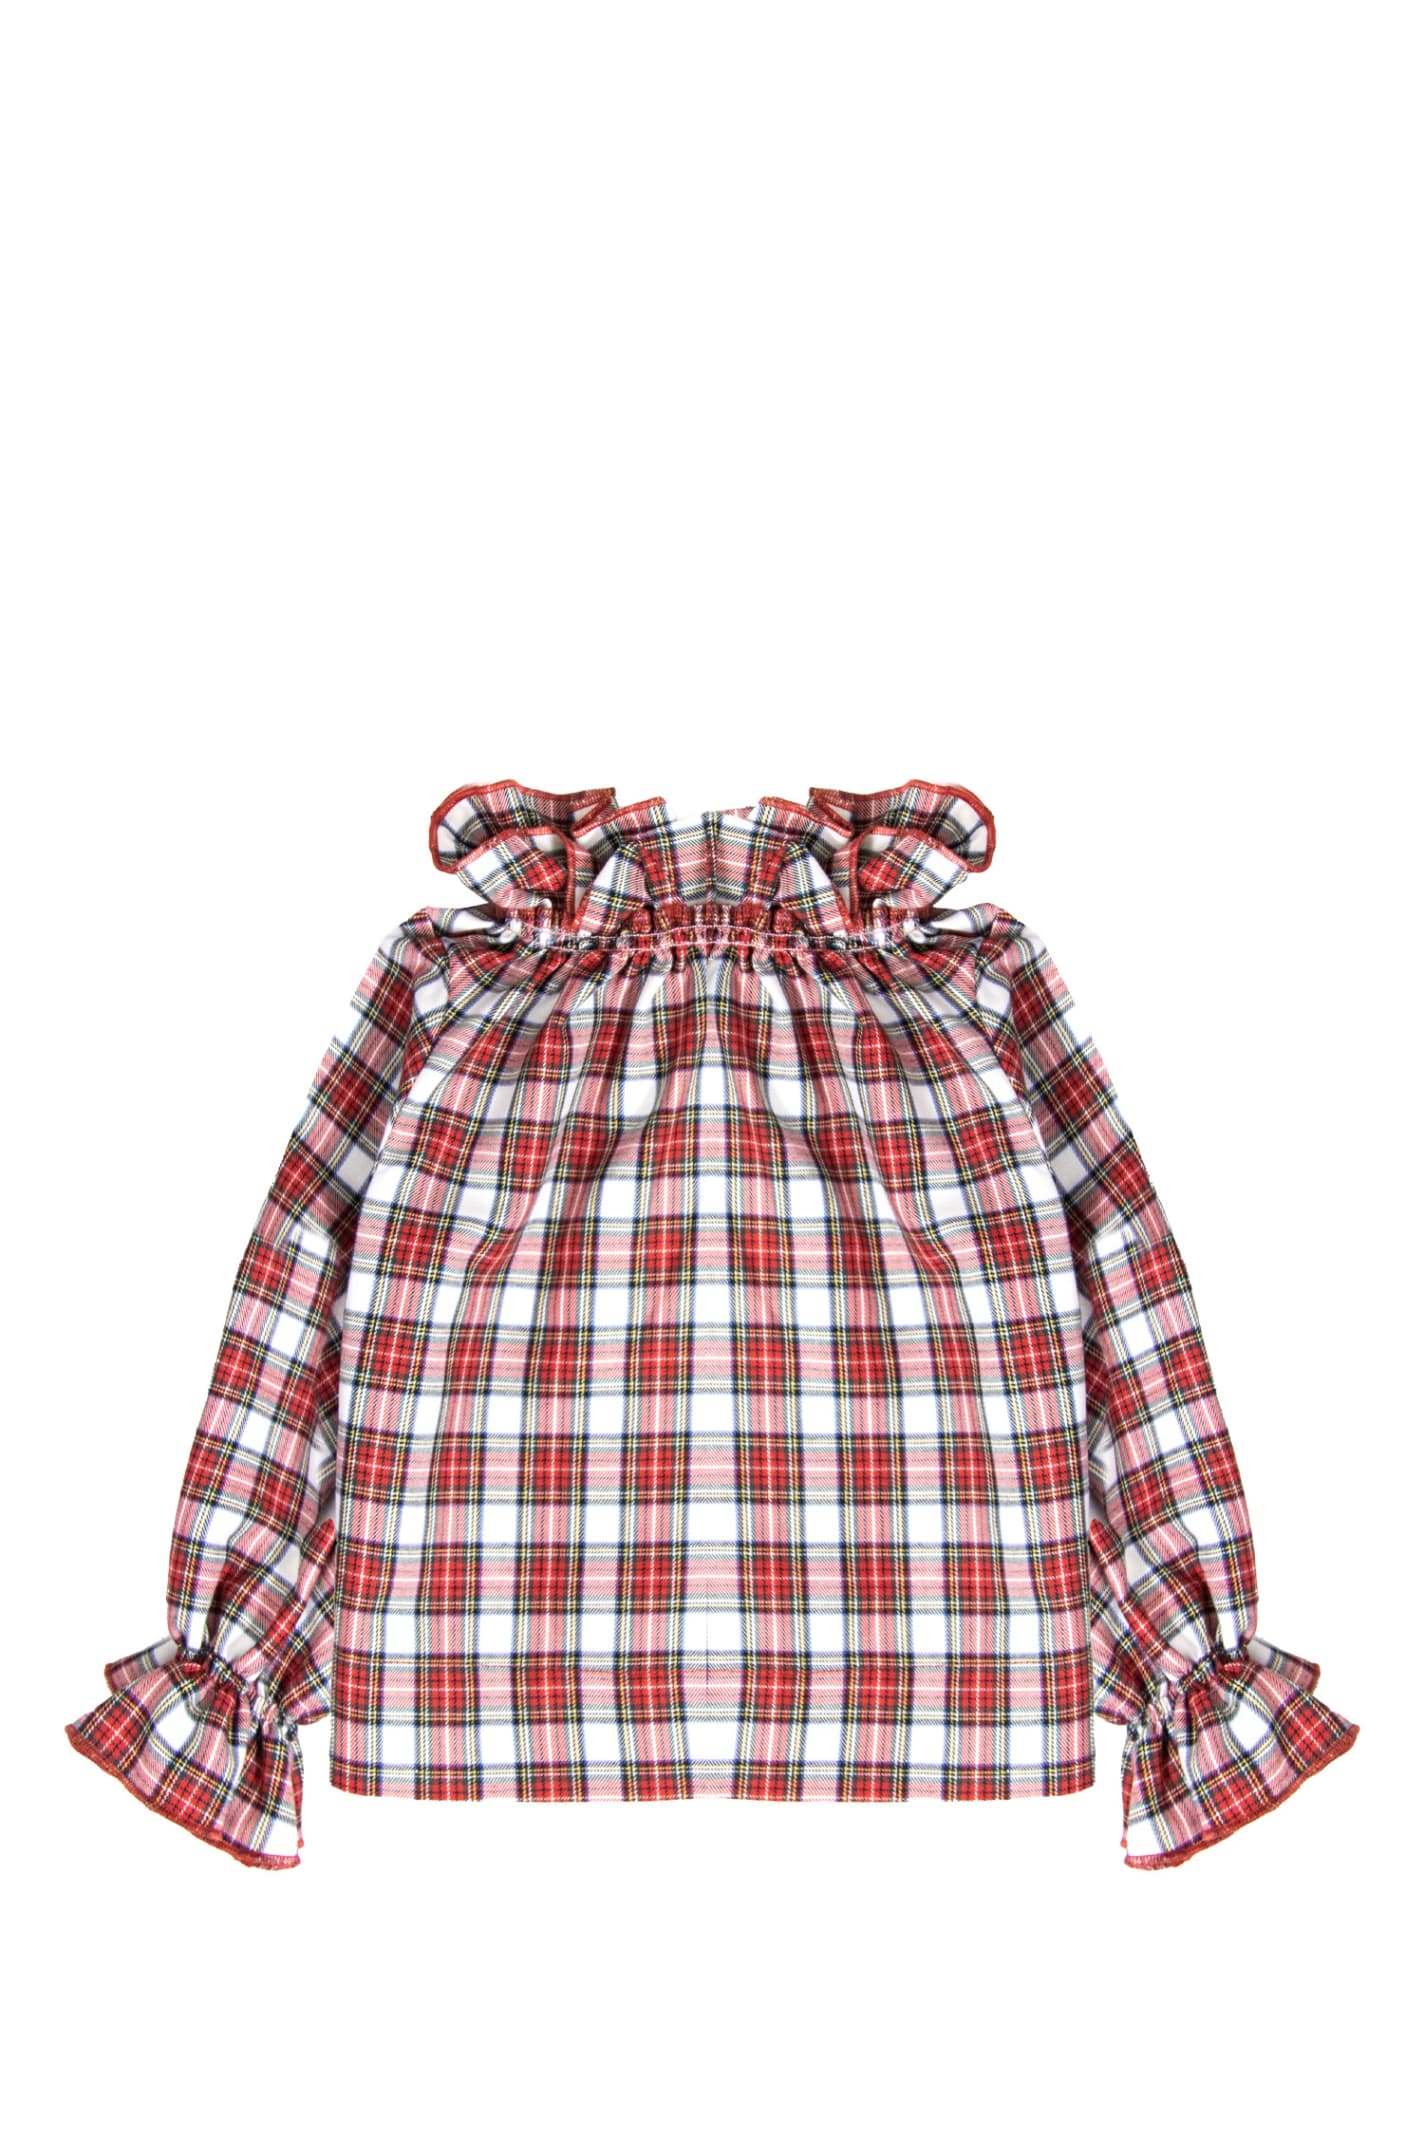 La Stupenderia Babies' Cotton Blend Blouse In Red